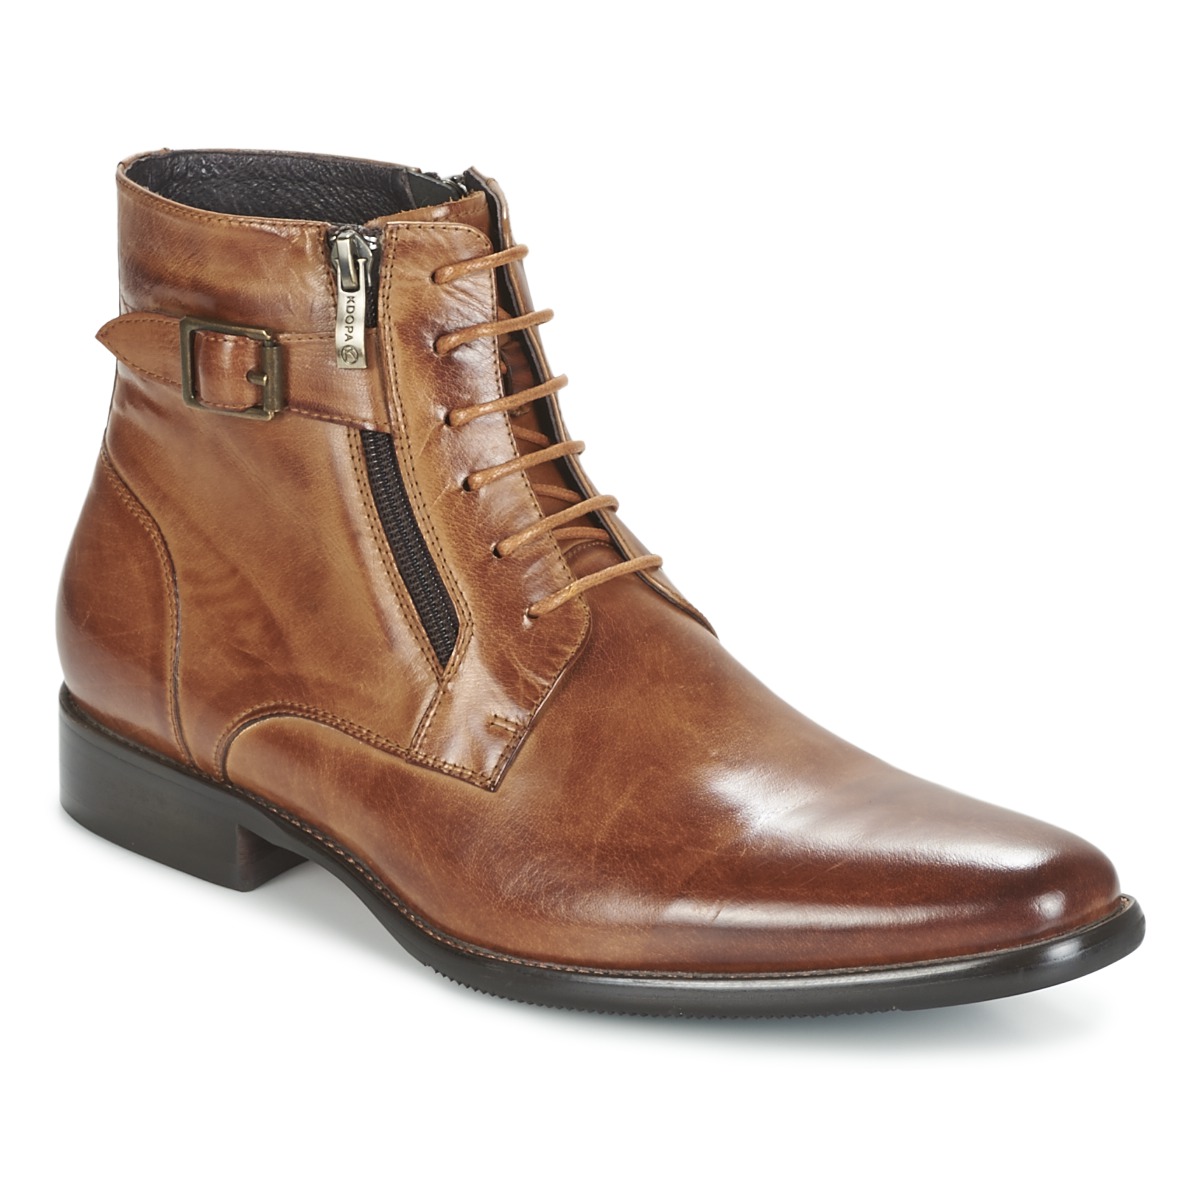 Shoes Men Mid boots Kdopa BAUDRY Brown